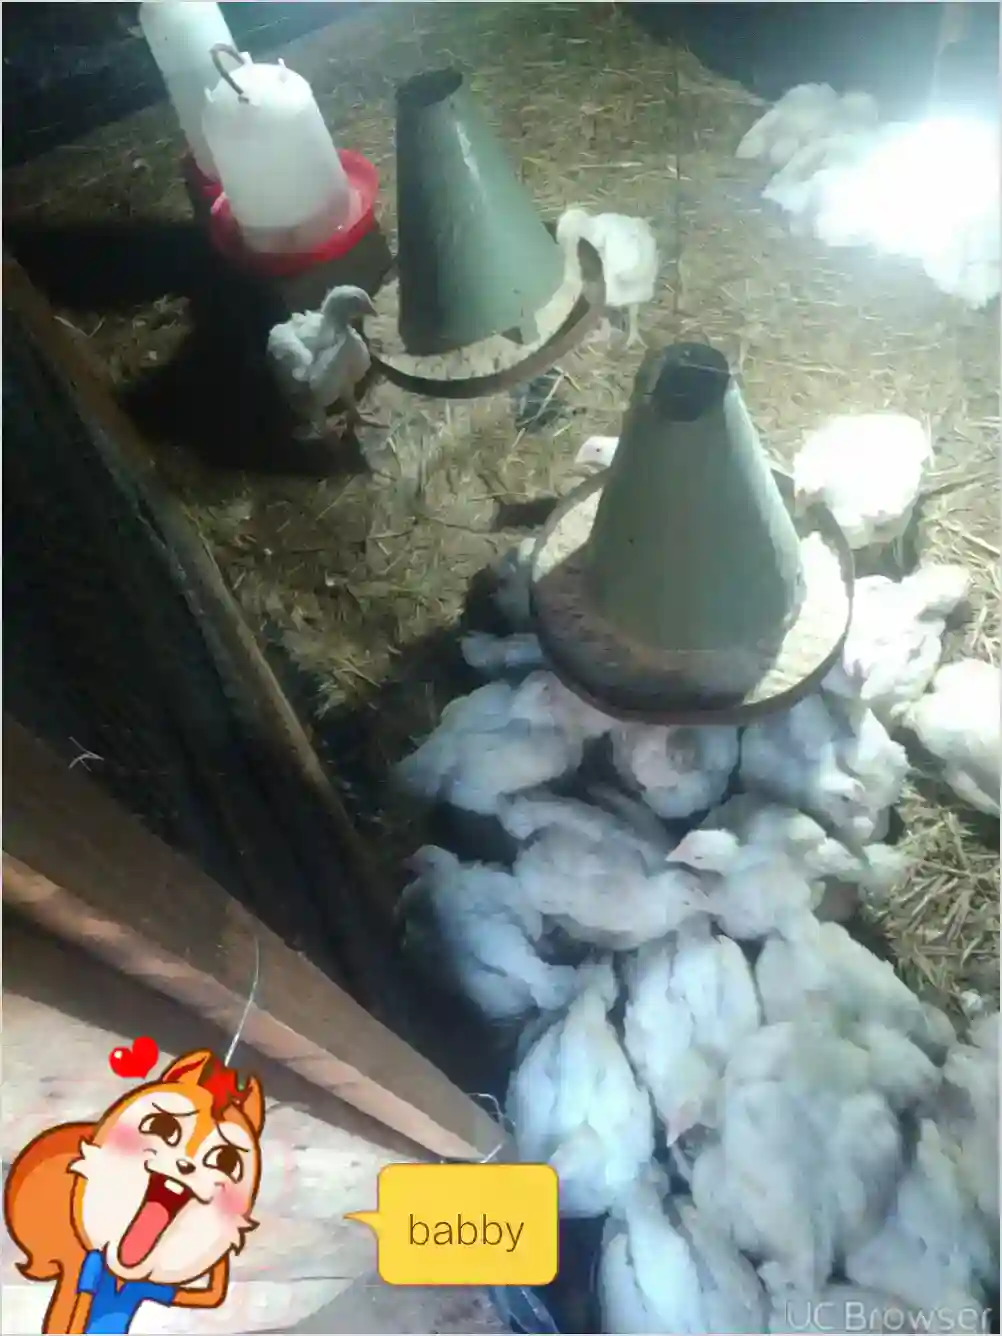 Broiler Chickens